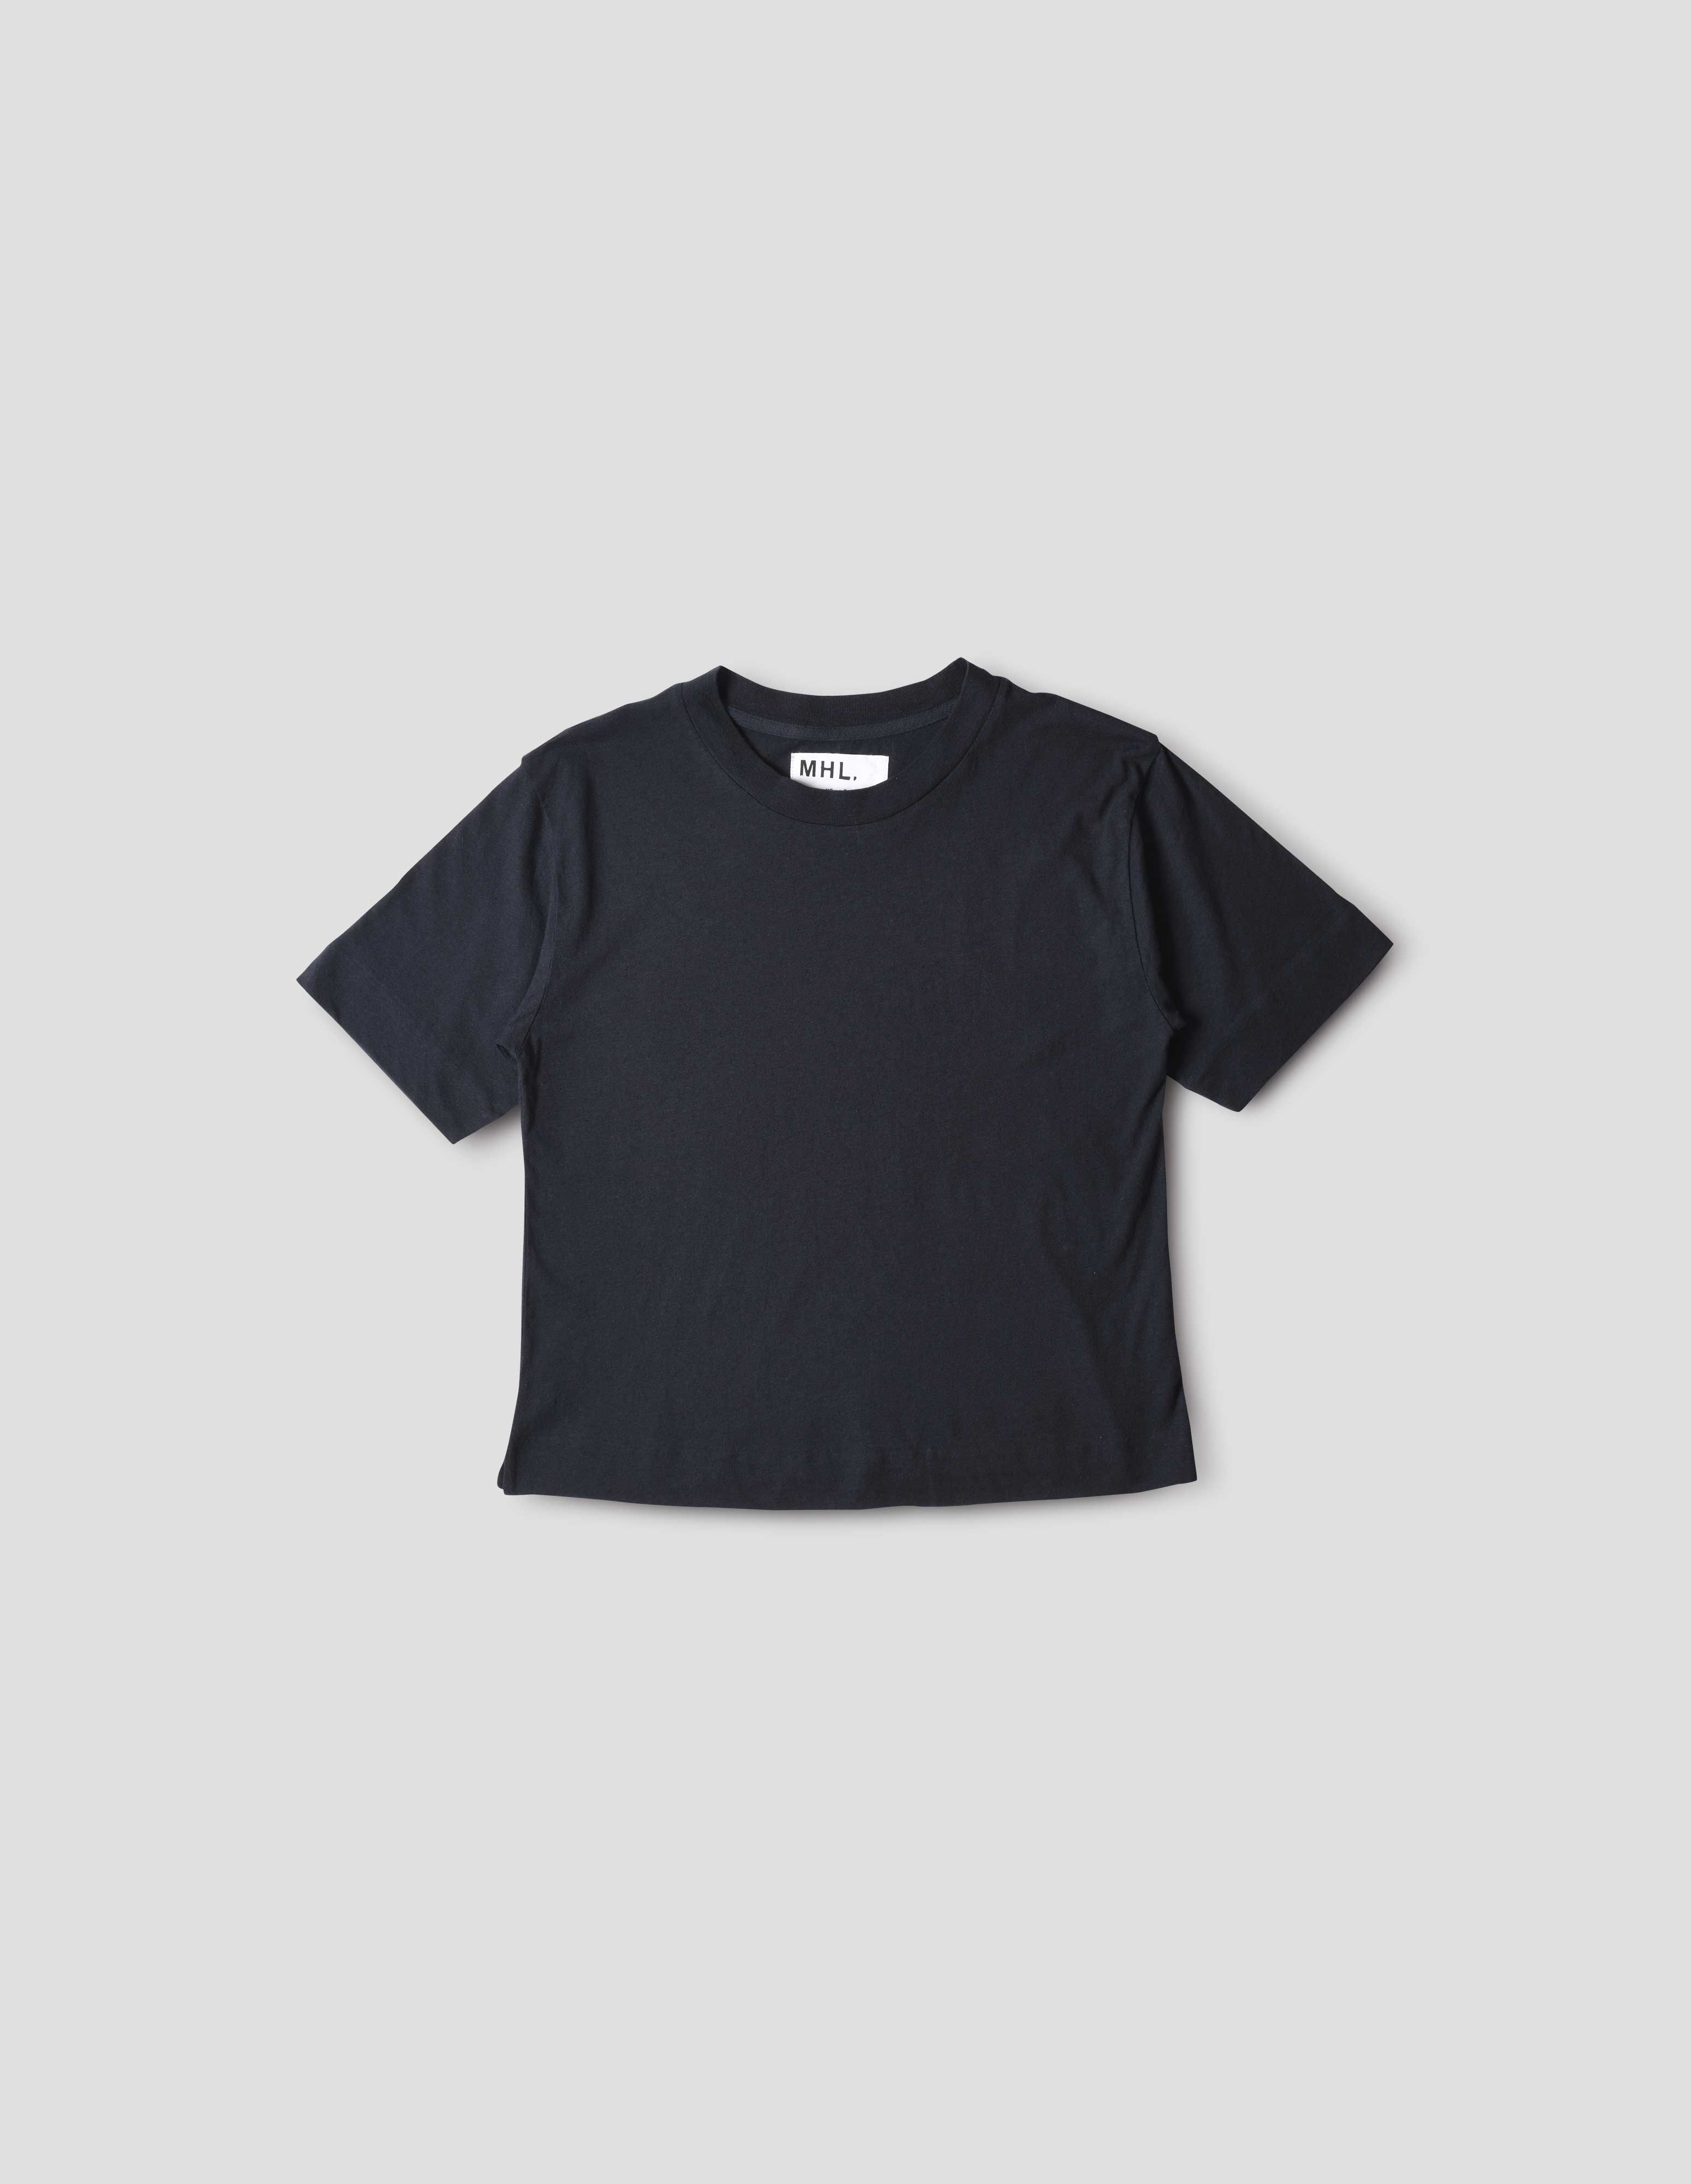 MARGARET HOWELL - Navy cotton linen simple t shirt | MHL. by Margaret ...